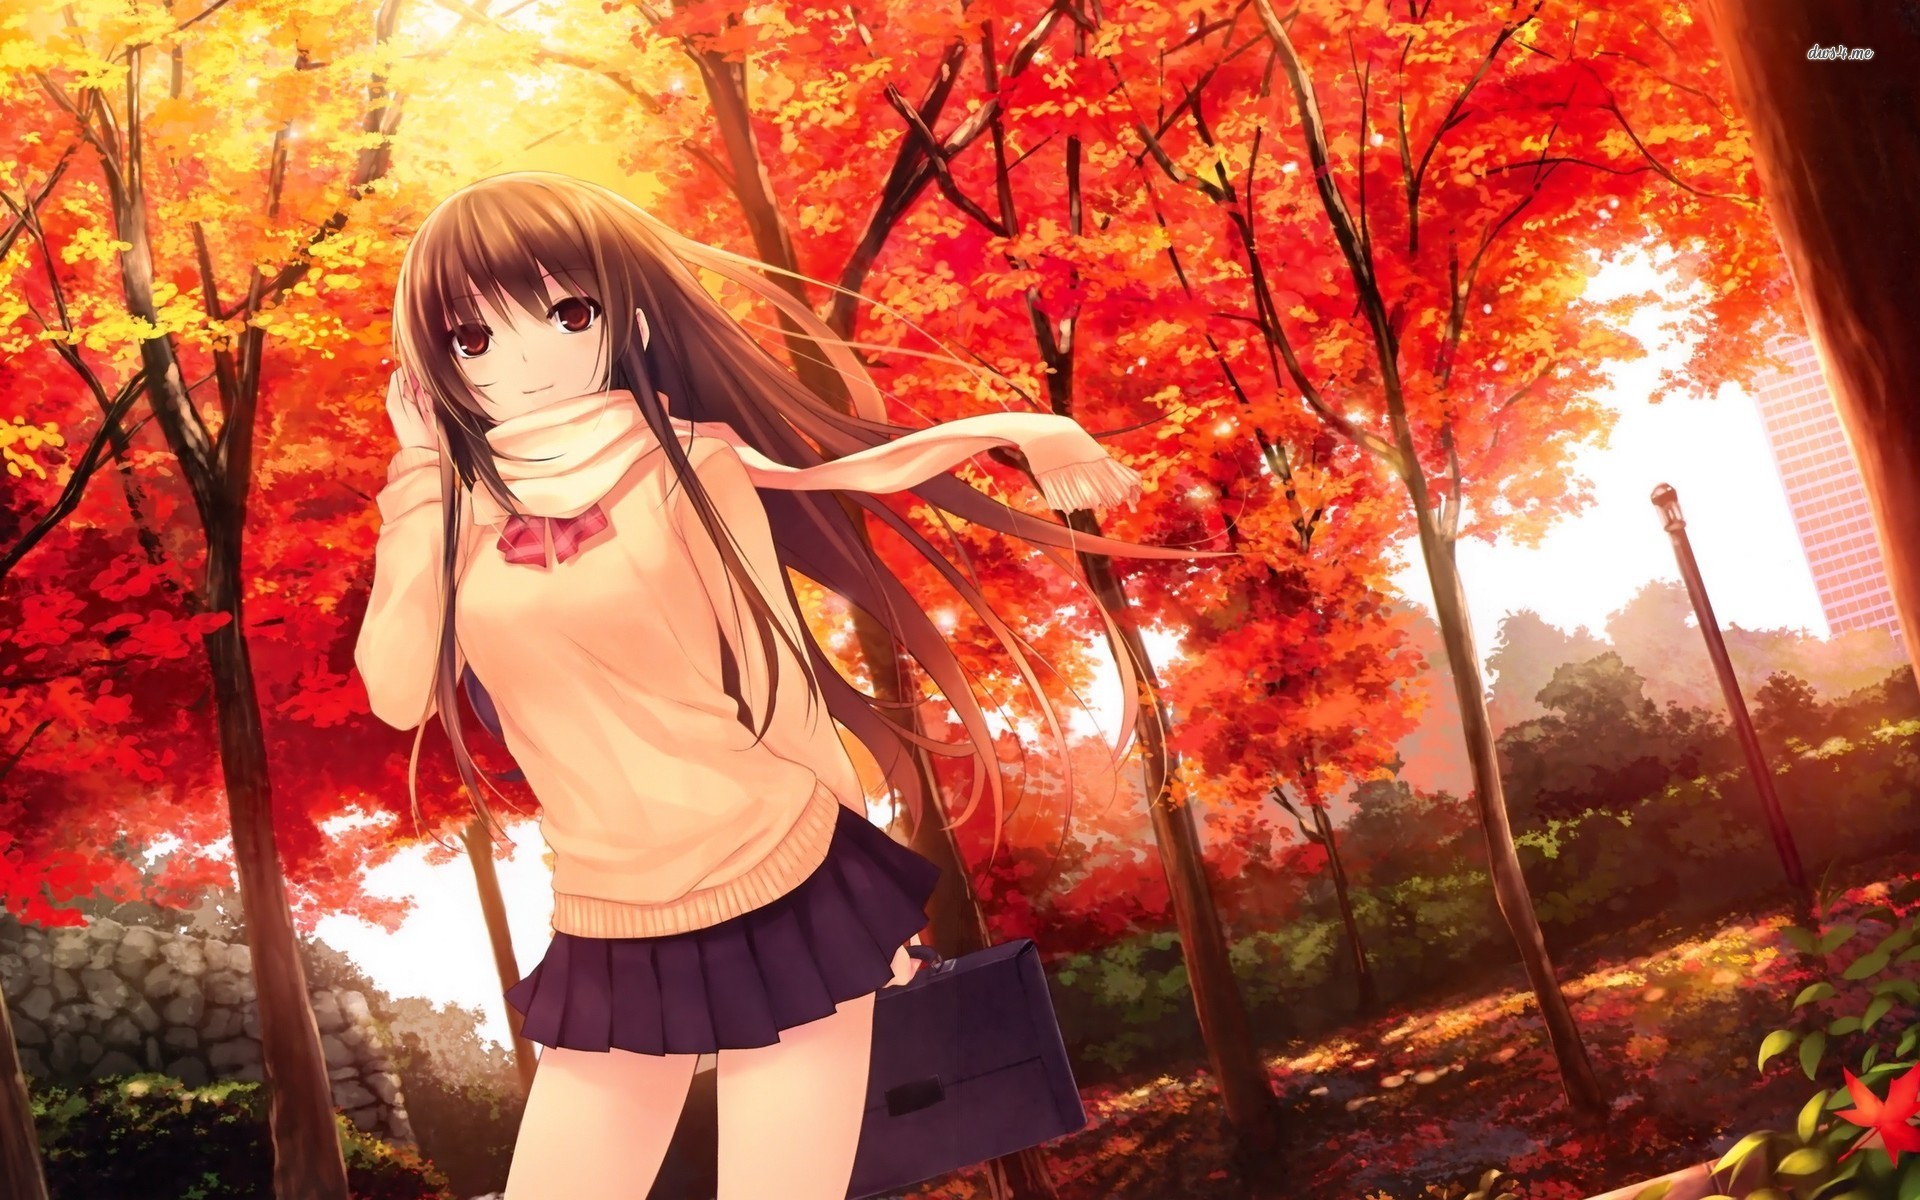 Download Anime Park Autumn Walk Background | Wallpapers.com